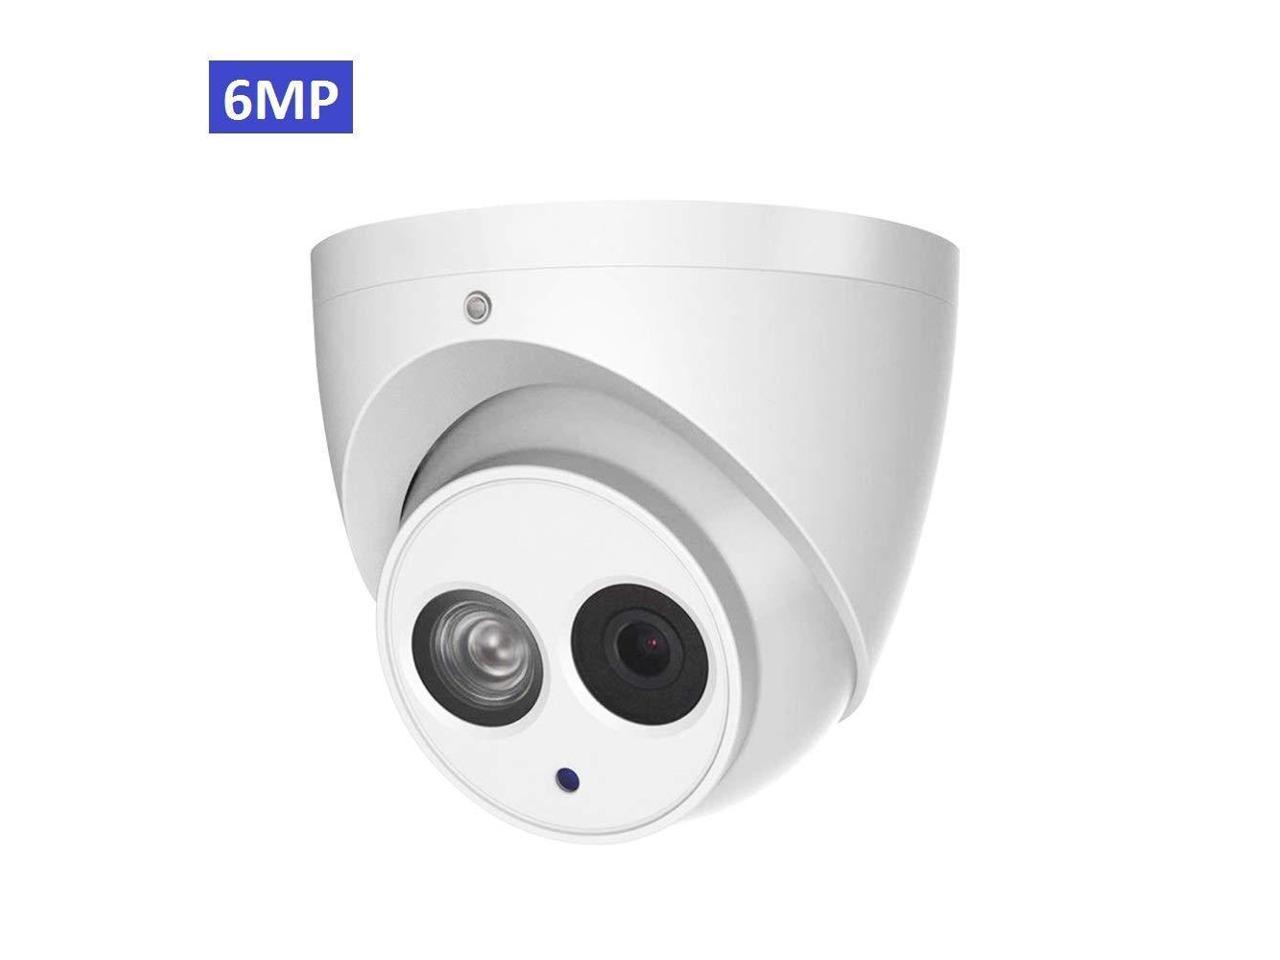 6MP Outdoor PoE IP Camera IPC-HDW4631C-A 2.8mm, Dome Security Camera